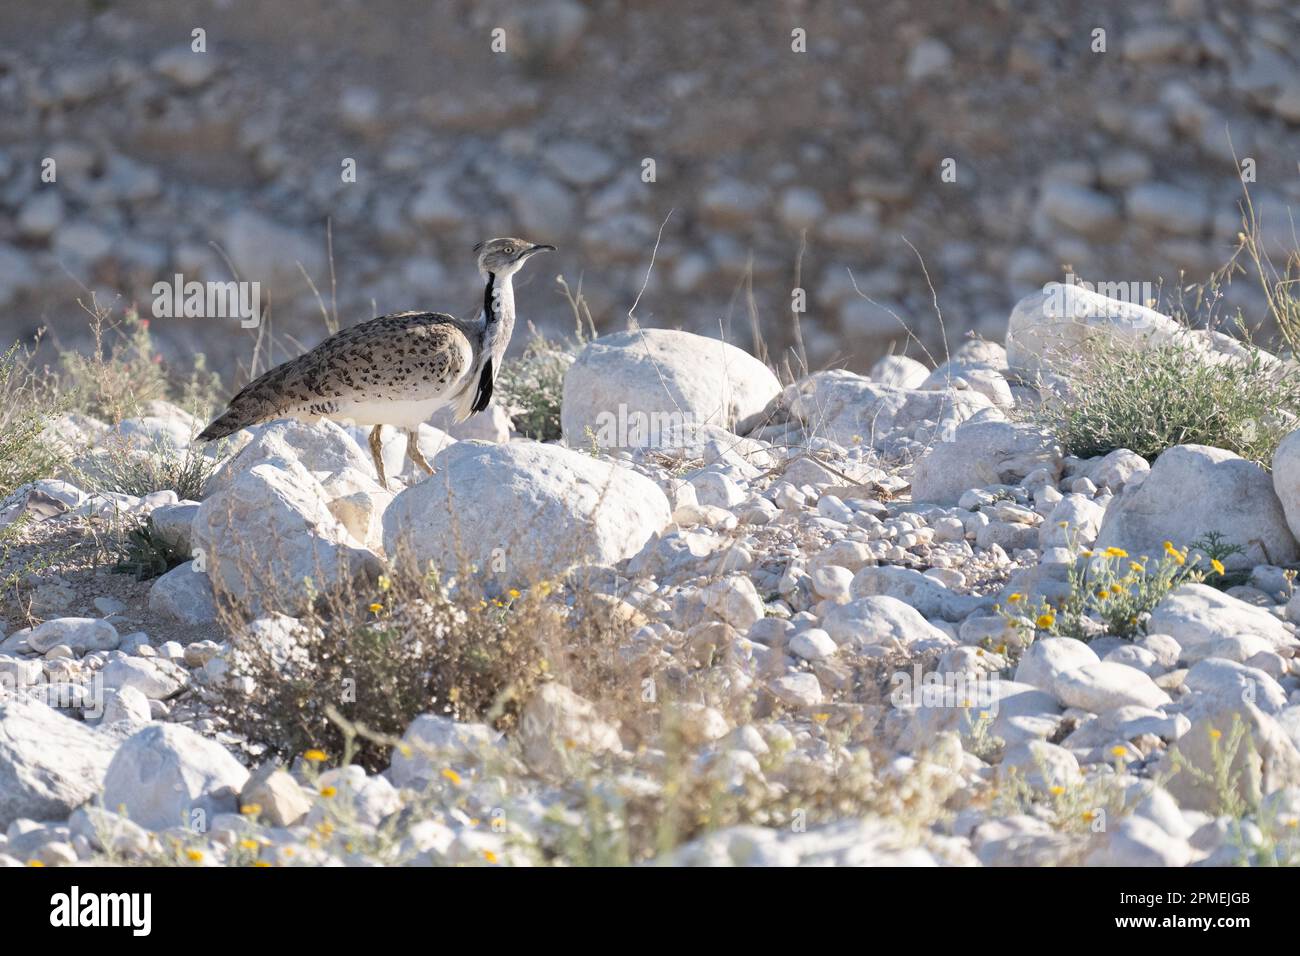 courtship display of a male MacQueen's bustard (Chlamydotis macqueenii) الحُبَارَى الآسِيَوِيّ is a large bird in the bustard family. It is native to Stock Photo